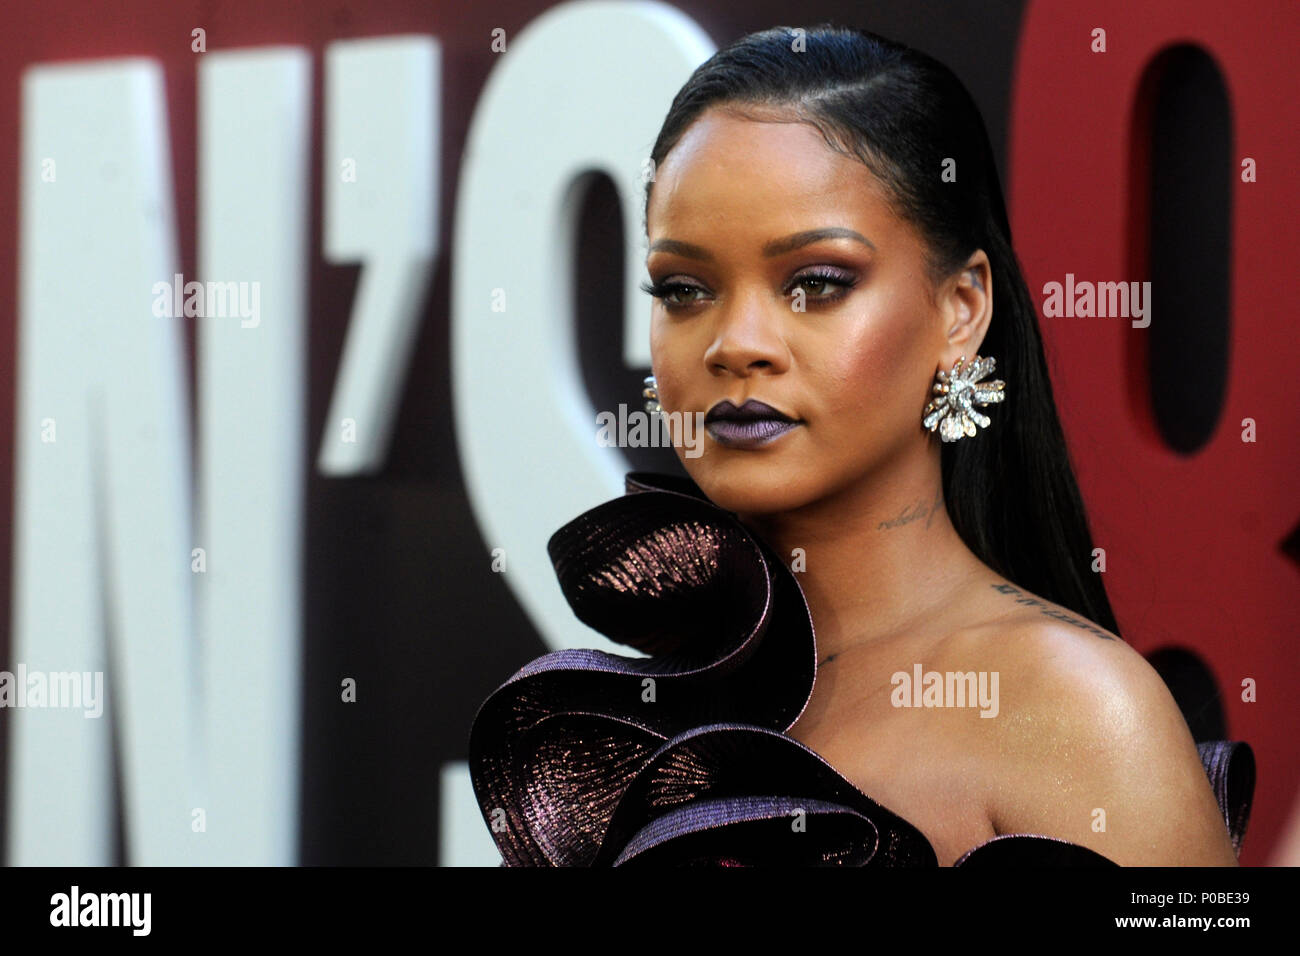 Rihanna attending the world premiere of 'Ocean's 8' at Alice Tully Hall at Lincoln Center on June 5, 2018 in New York City. Stock Photo